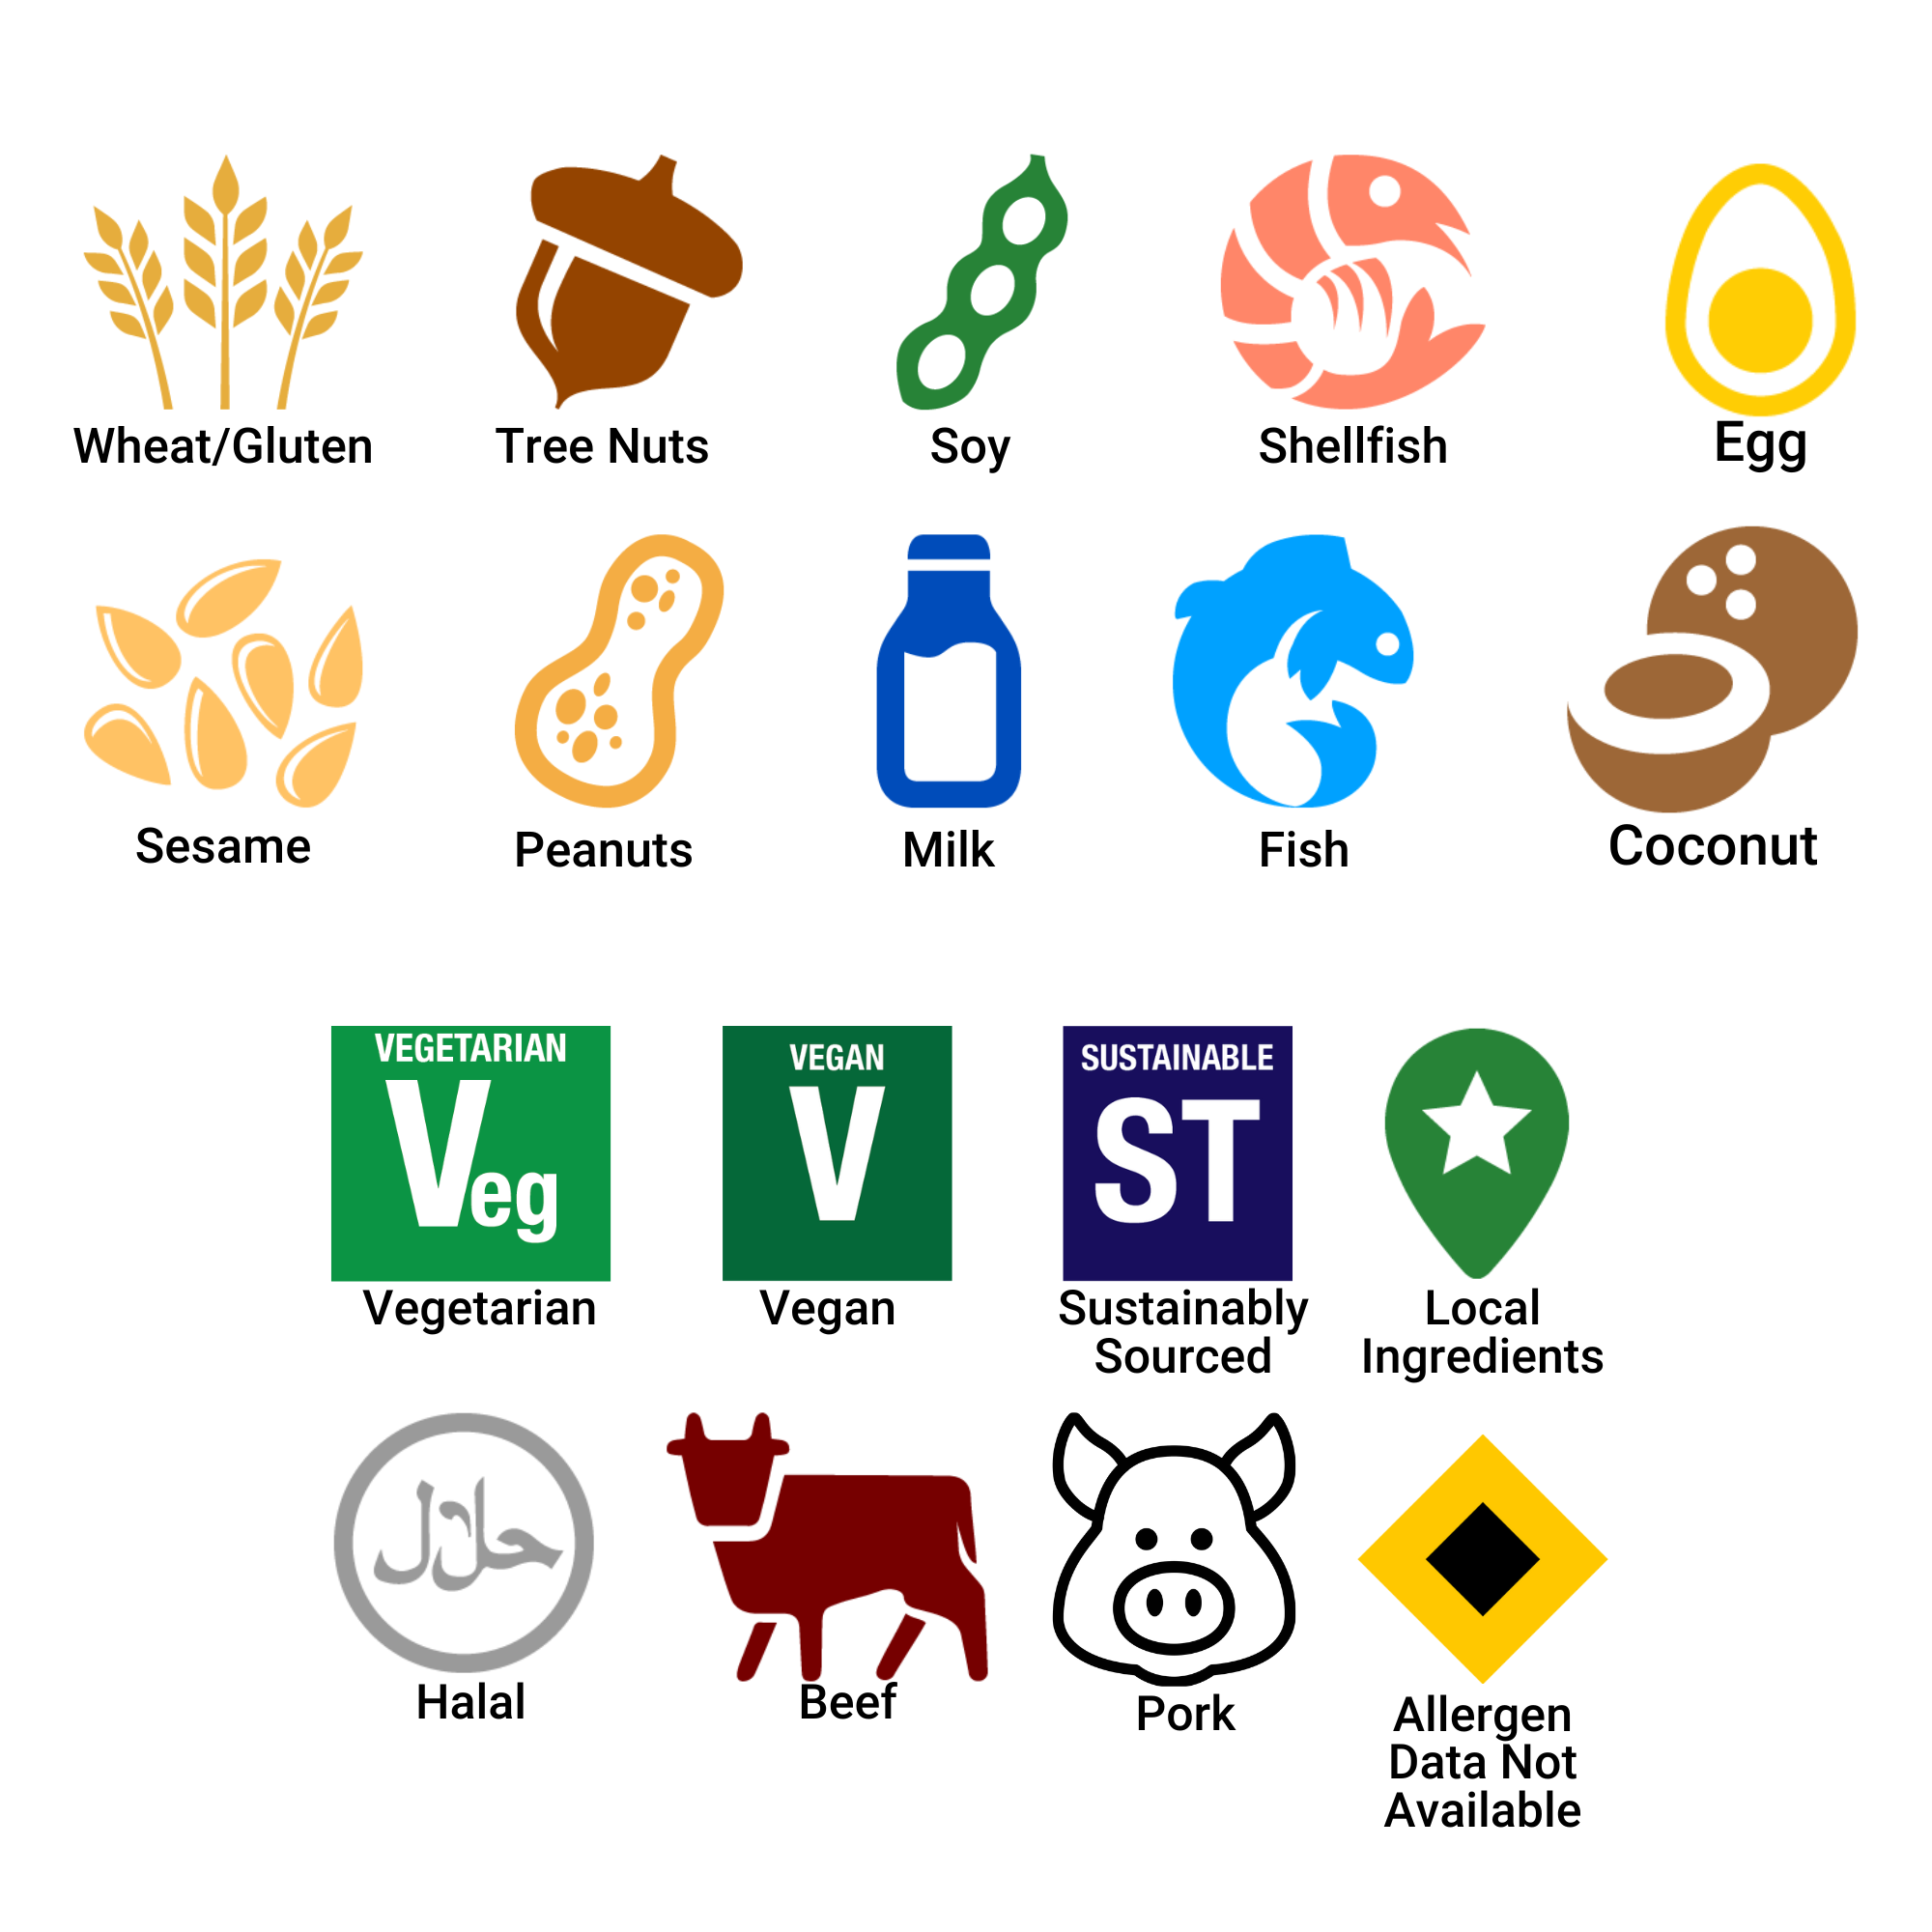 Icons for Allergens and Preferences